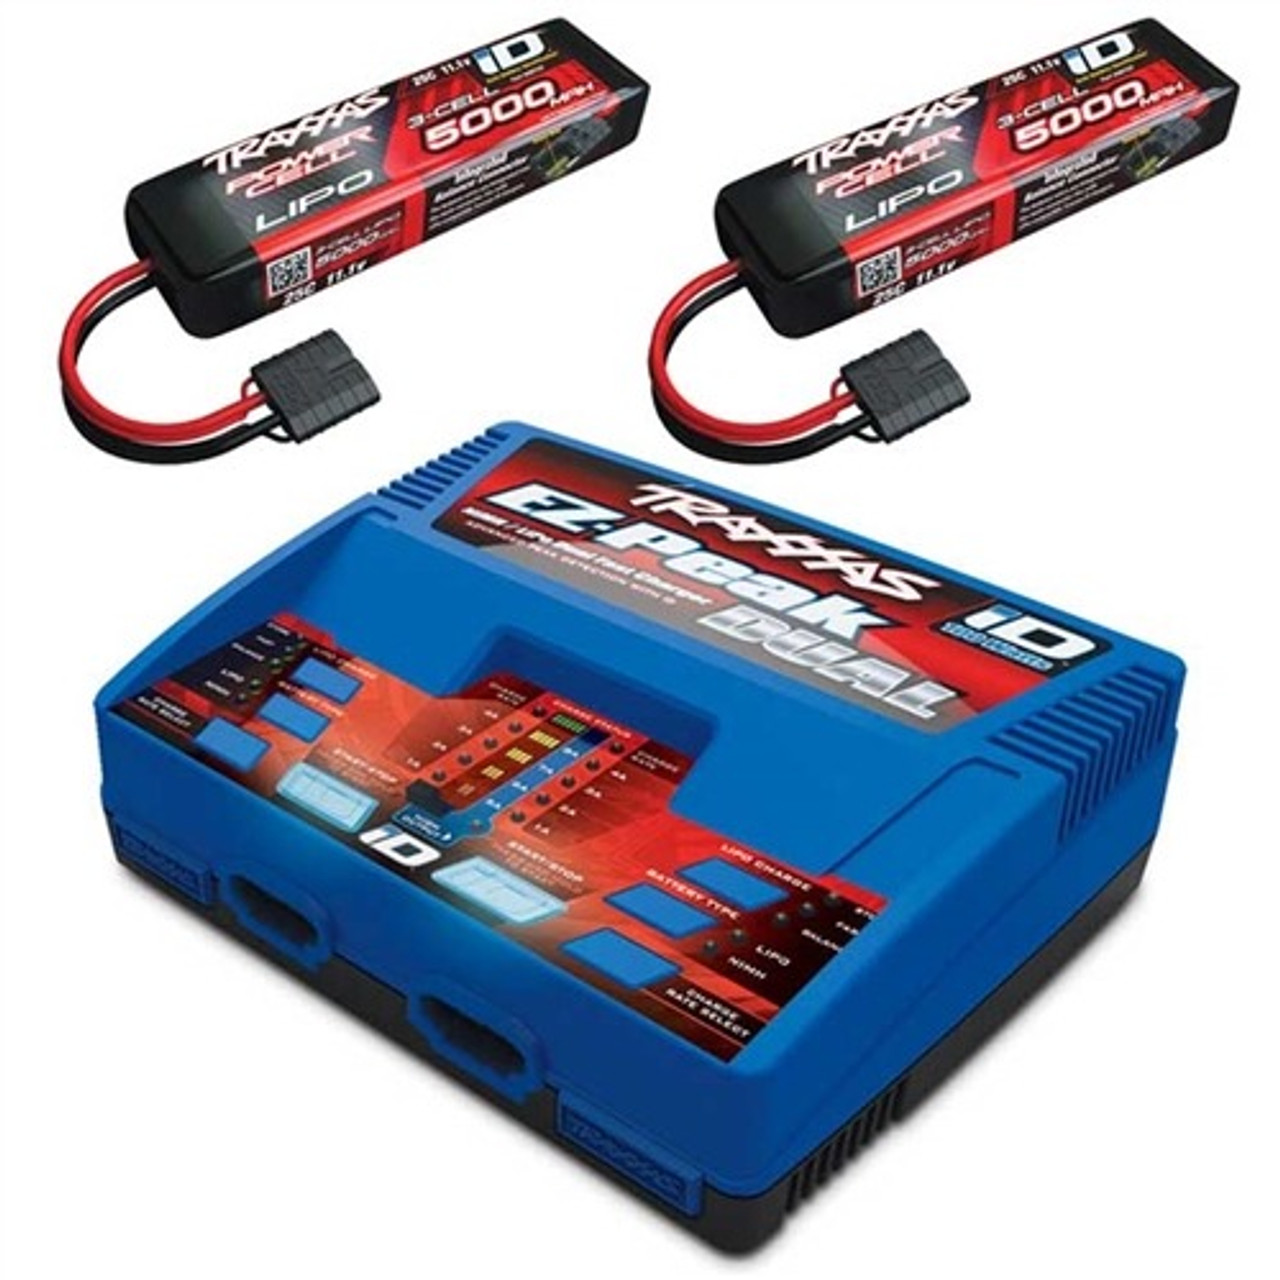 MHD Chargeur Lipo Ultimate pro 3 V2 2S/3S 2A Z032069 - RC Riders